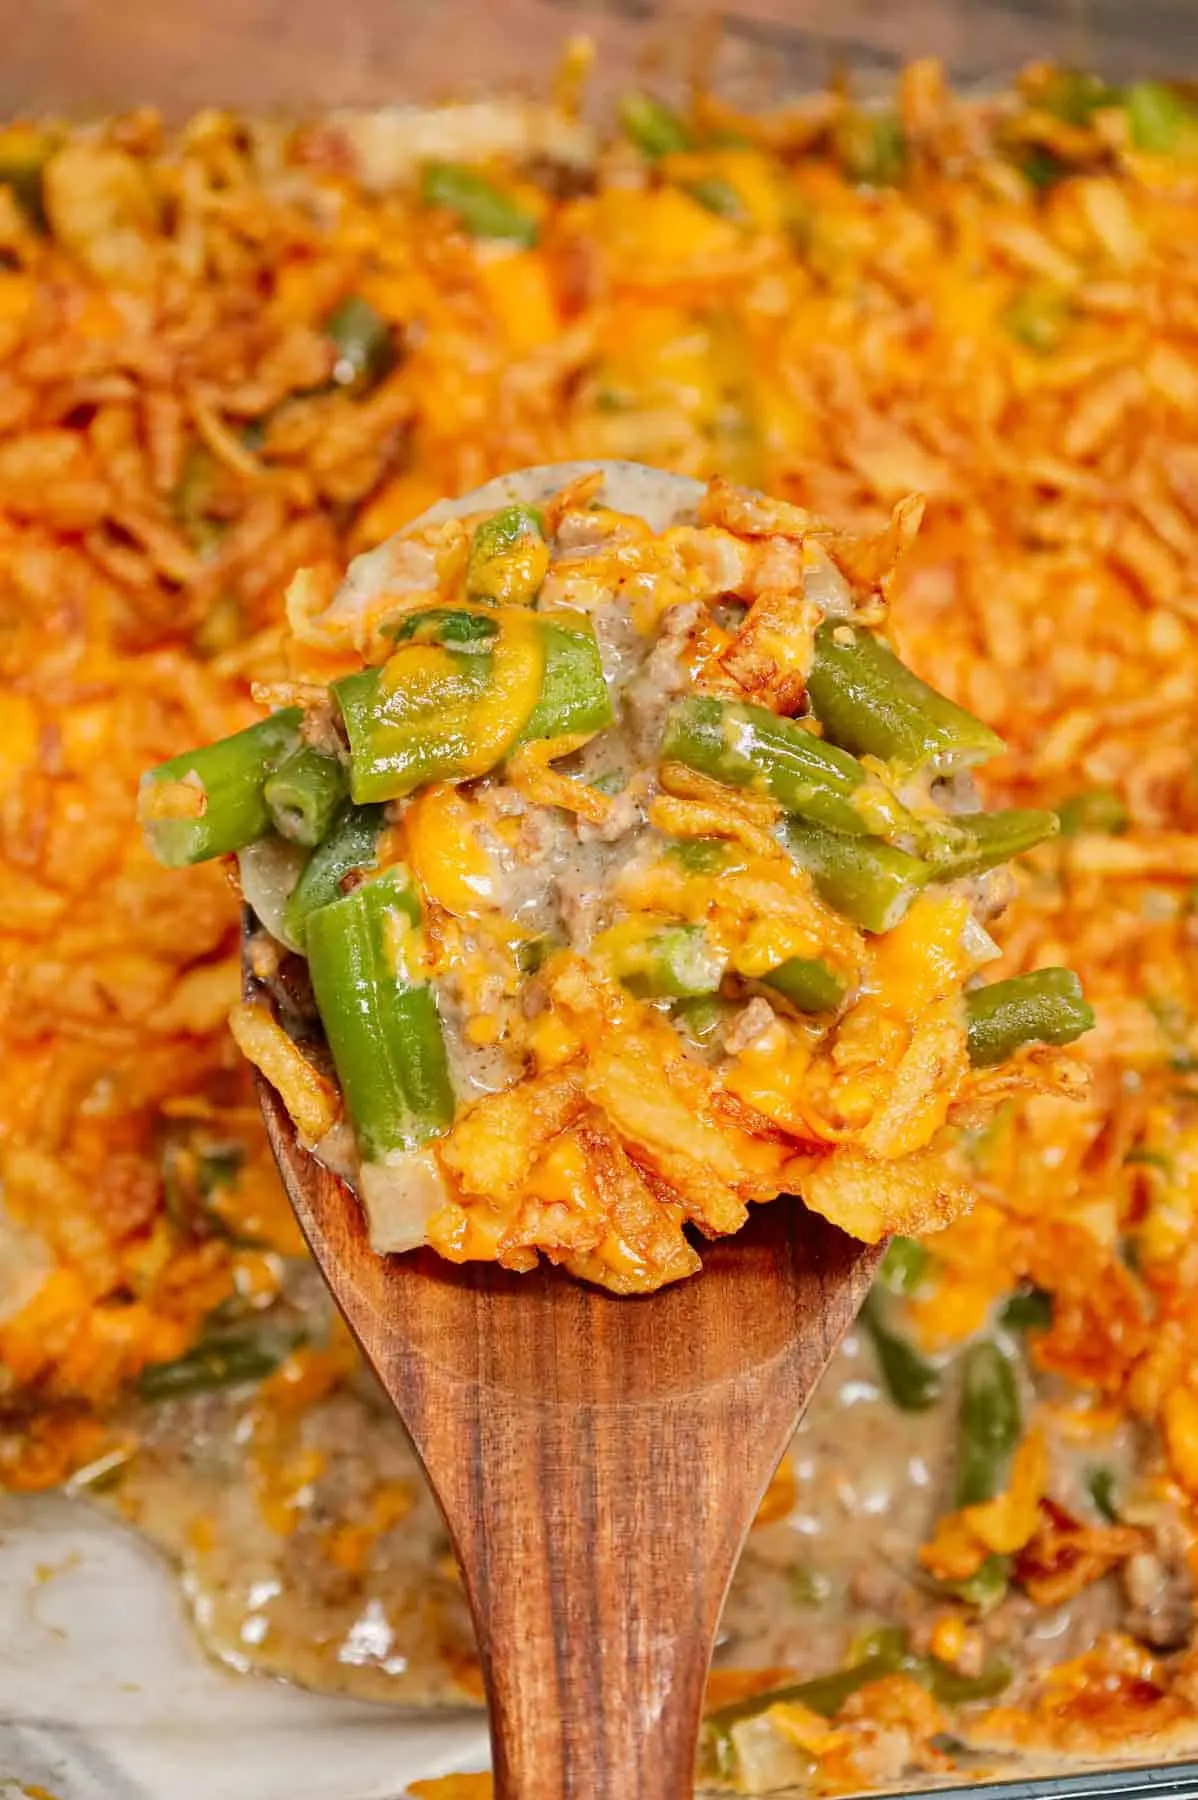 Hamburger Green Bean Casserole is a hearty ground beef casserole recipe loaded with cut green beans, cream of mushroom soup, diced onions, shredded cheddar cheese and French's crispy fried onions.